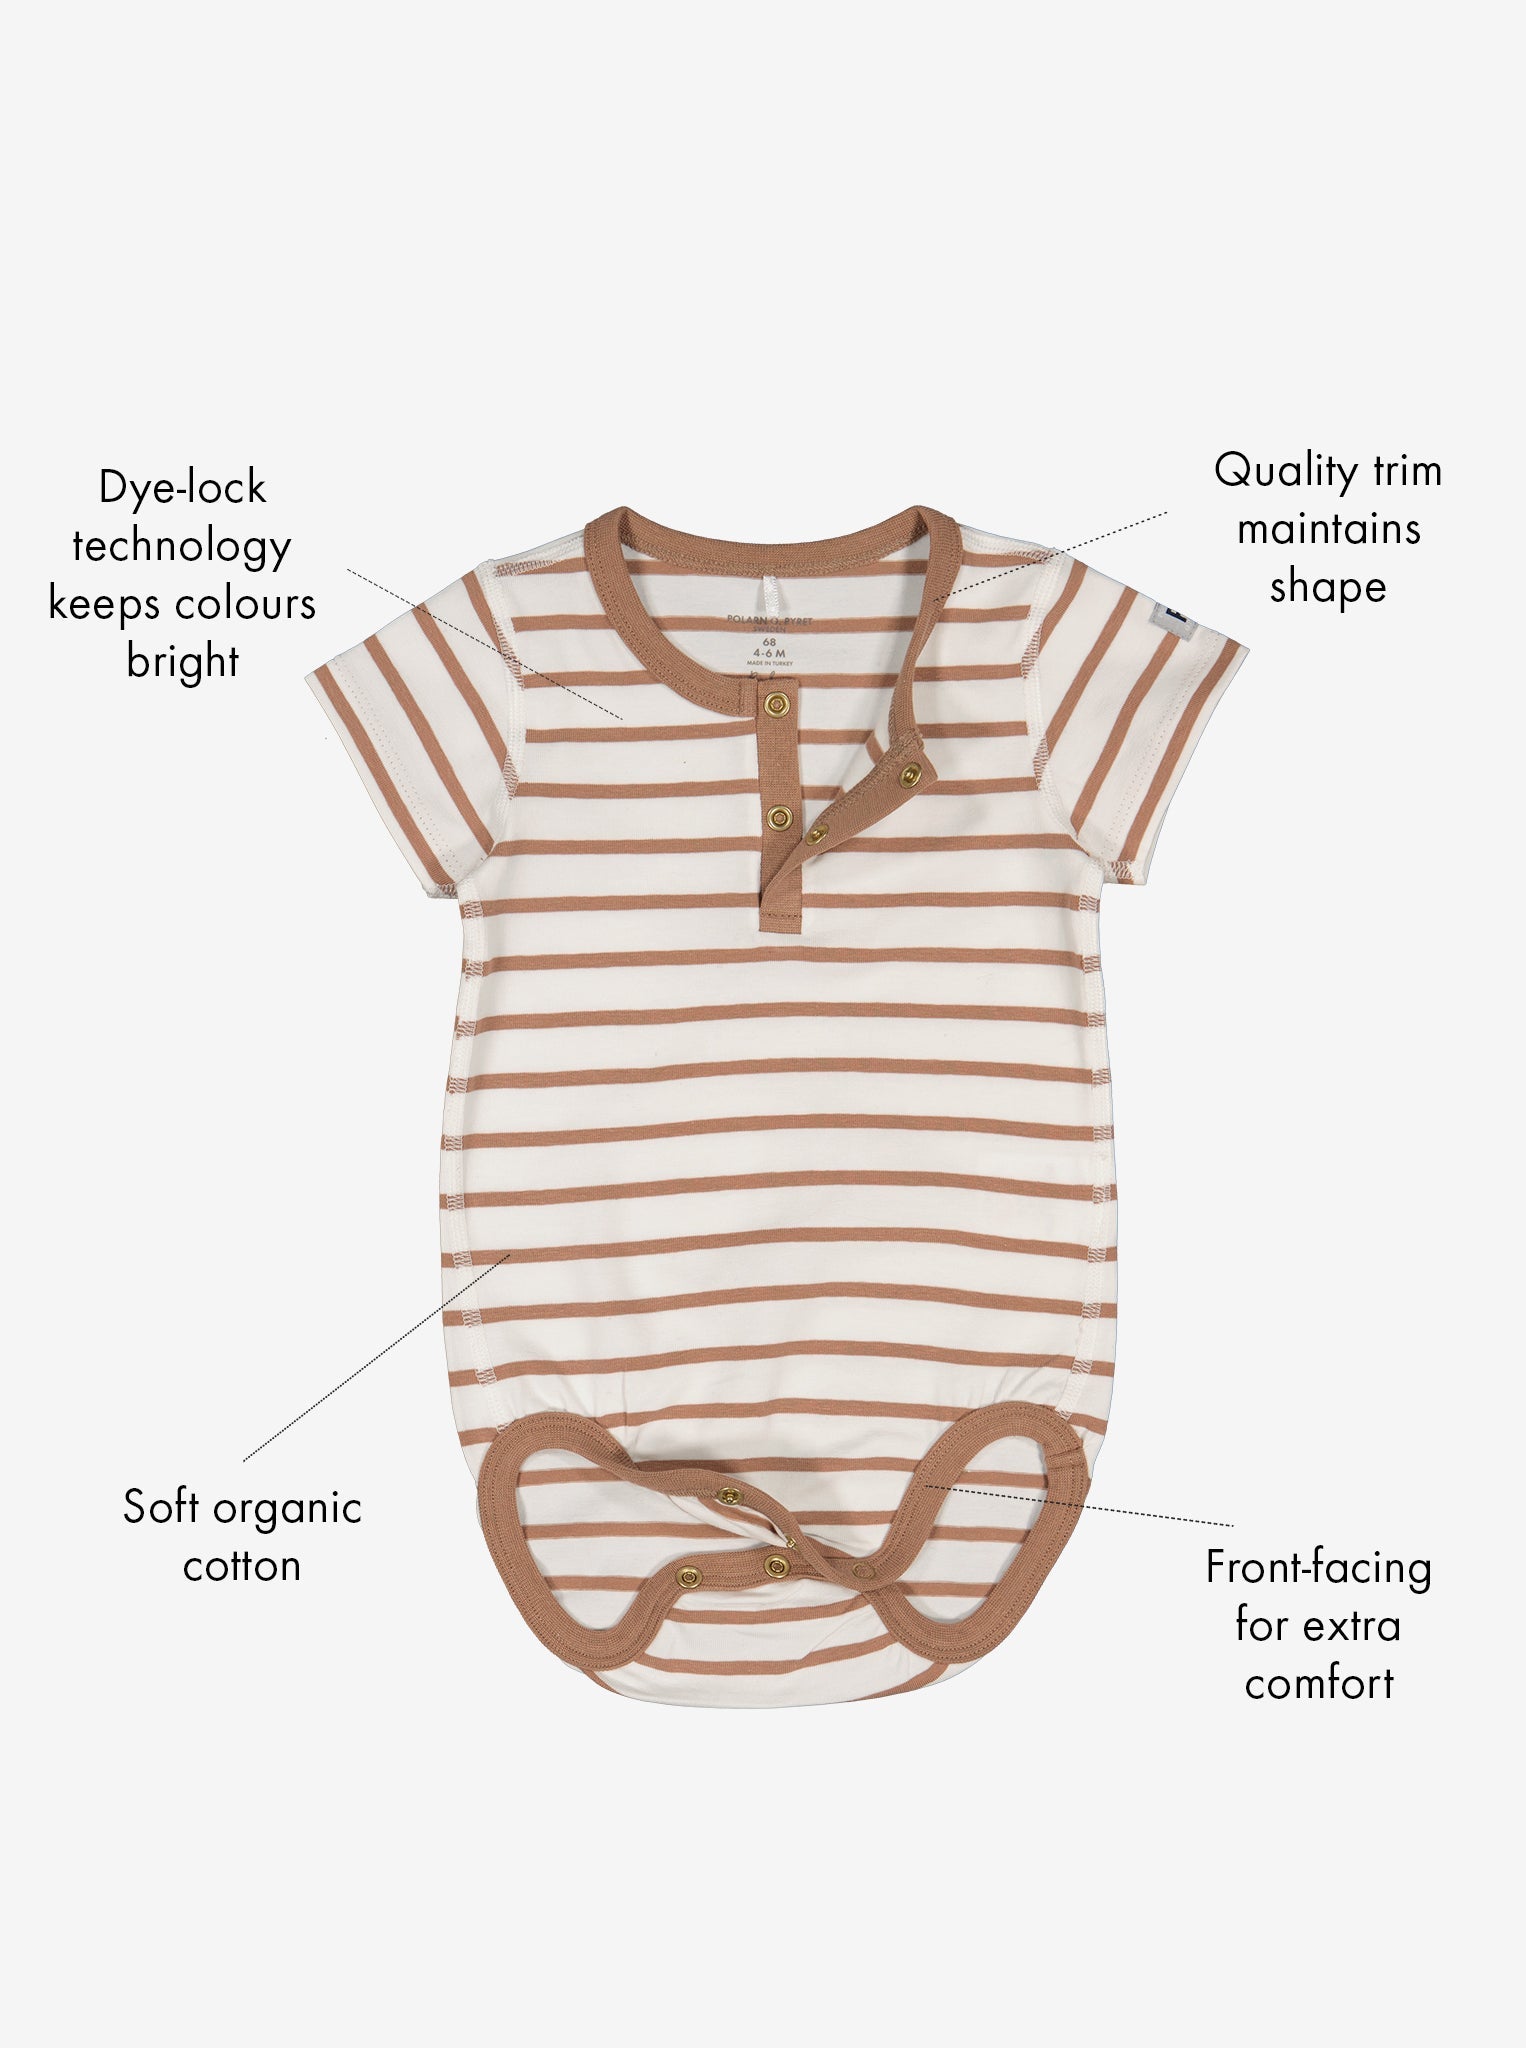 Unisex Short Sleeve Newborn Babygrow from Polarn O. Pyret Kidswear. Made from ethically sourced materials.